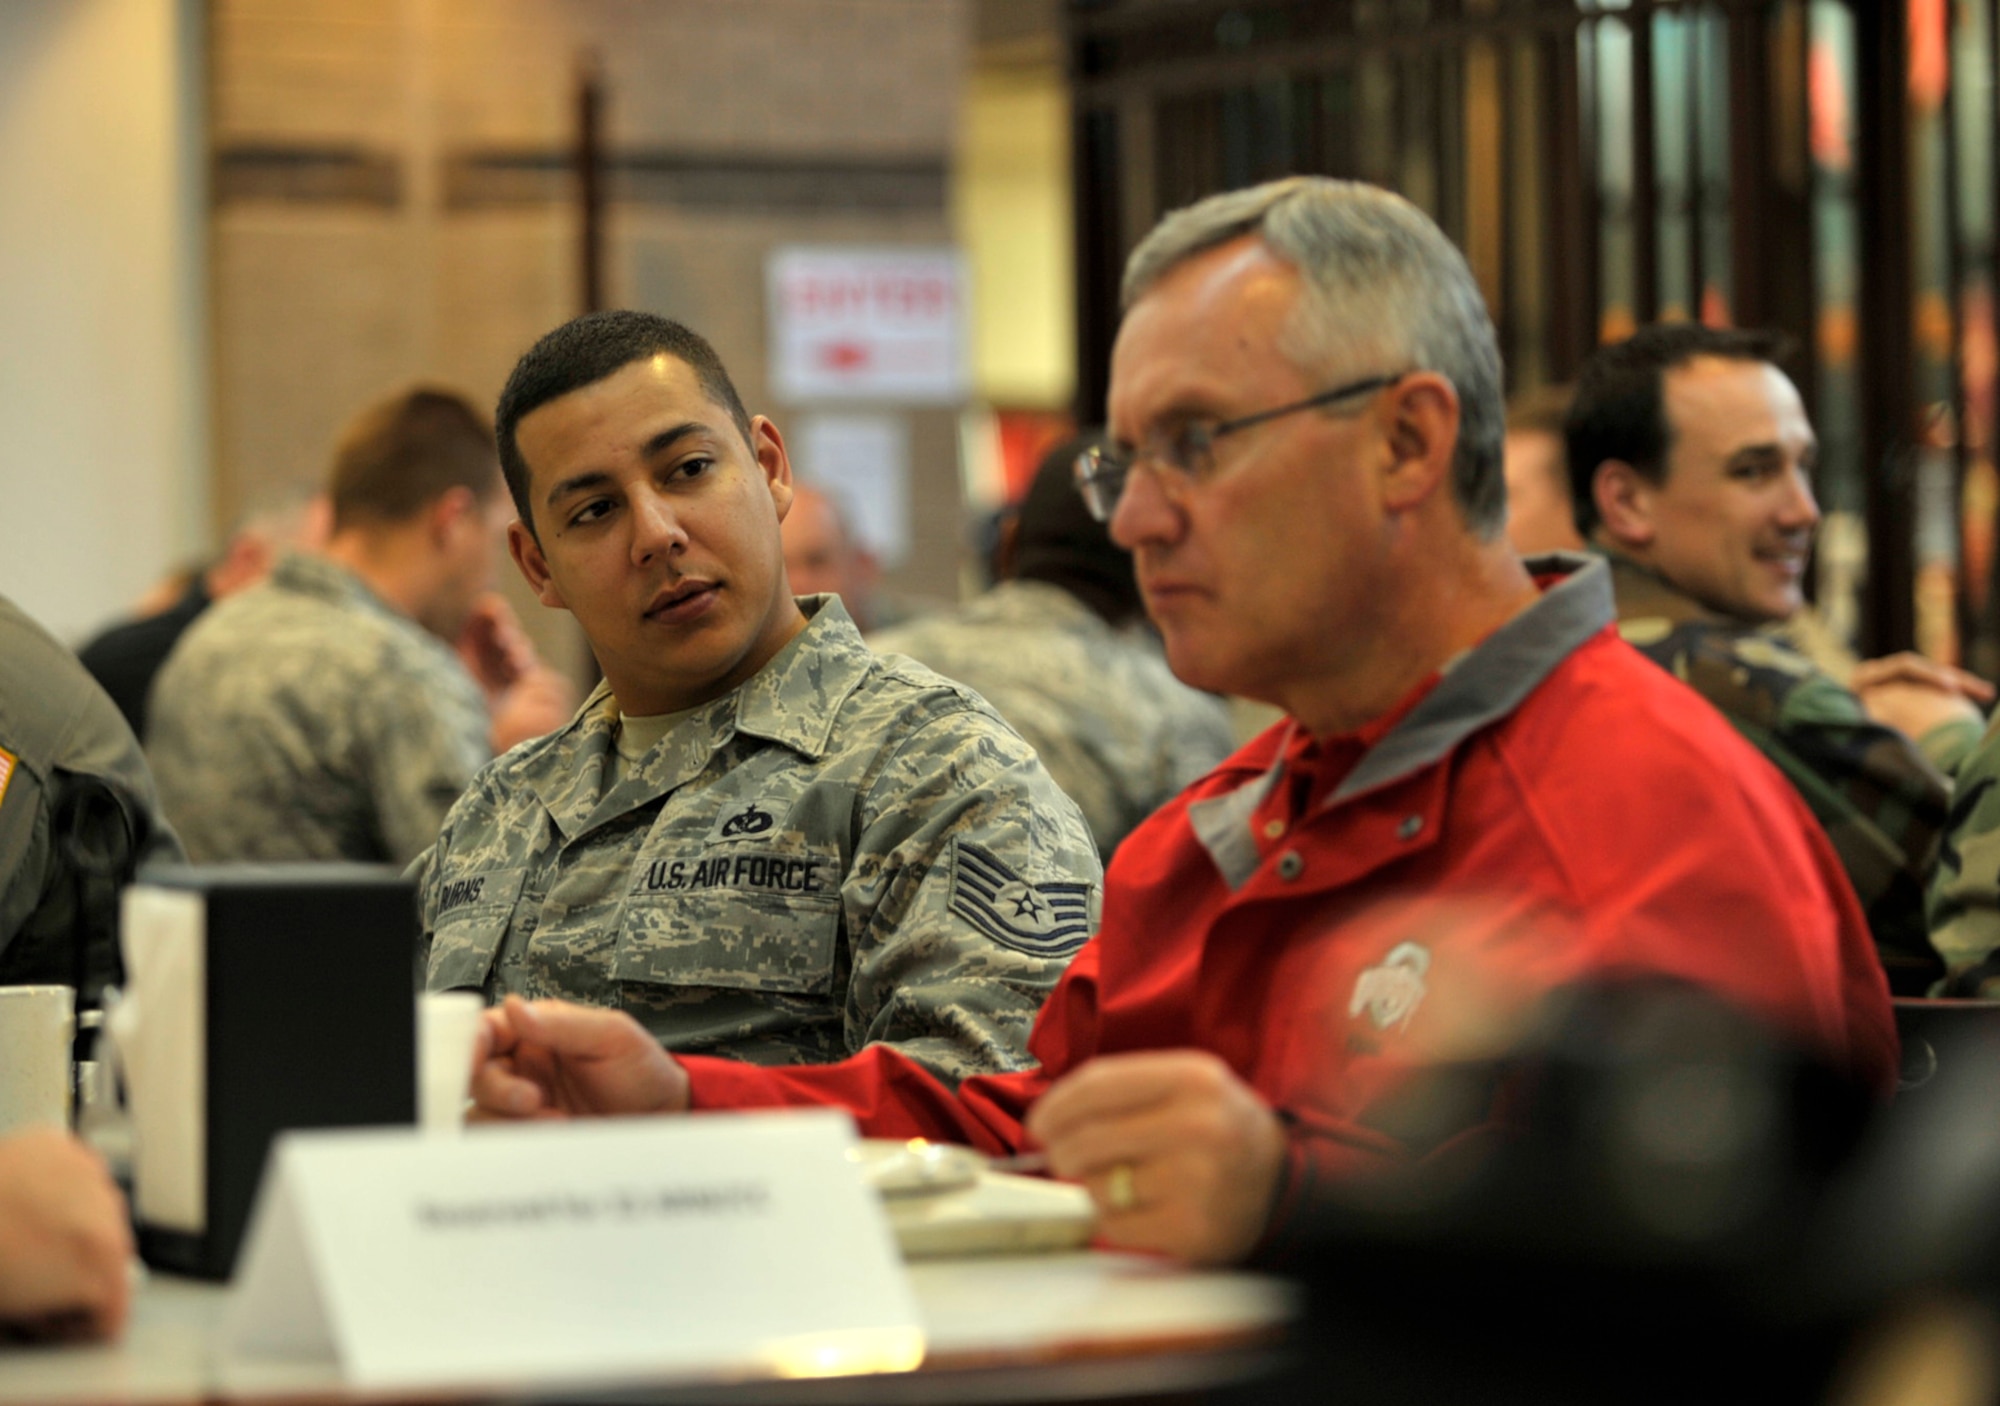 Tech. Sgt. Howard Burns listens to Ohio State football coach Jim Tressel during a breakfast at McConnell Air Force Base, Kan., on May 28. Sergeant Burns, a Reservist assigned to the 931st Civil Engineer Squadron at McConnell, was part of a group of Airmen selected to eat with Tressel, Wake Forest coach Jim Grobe and Air Force coach Troy Calhoun, during the first part of Coaches Tour 2009. (U.S. Air Force photo/Tech. Sgt. Jason Schaap)